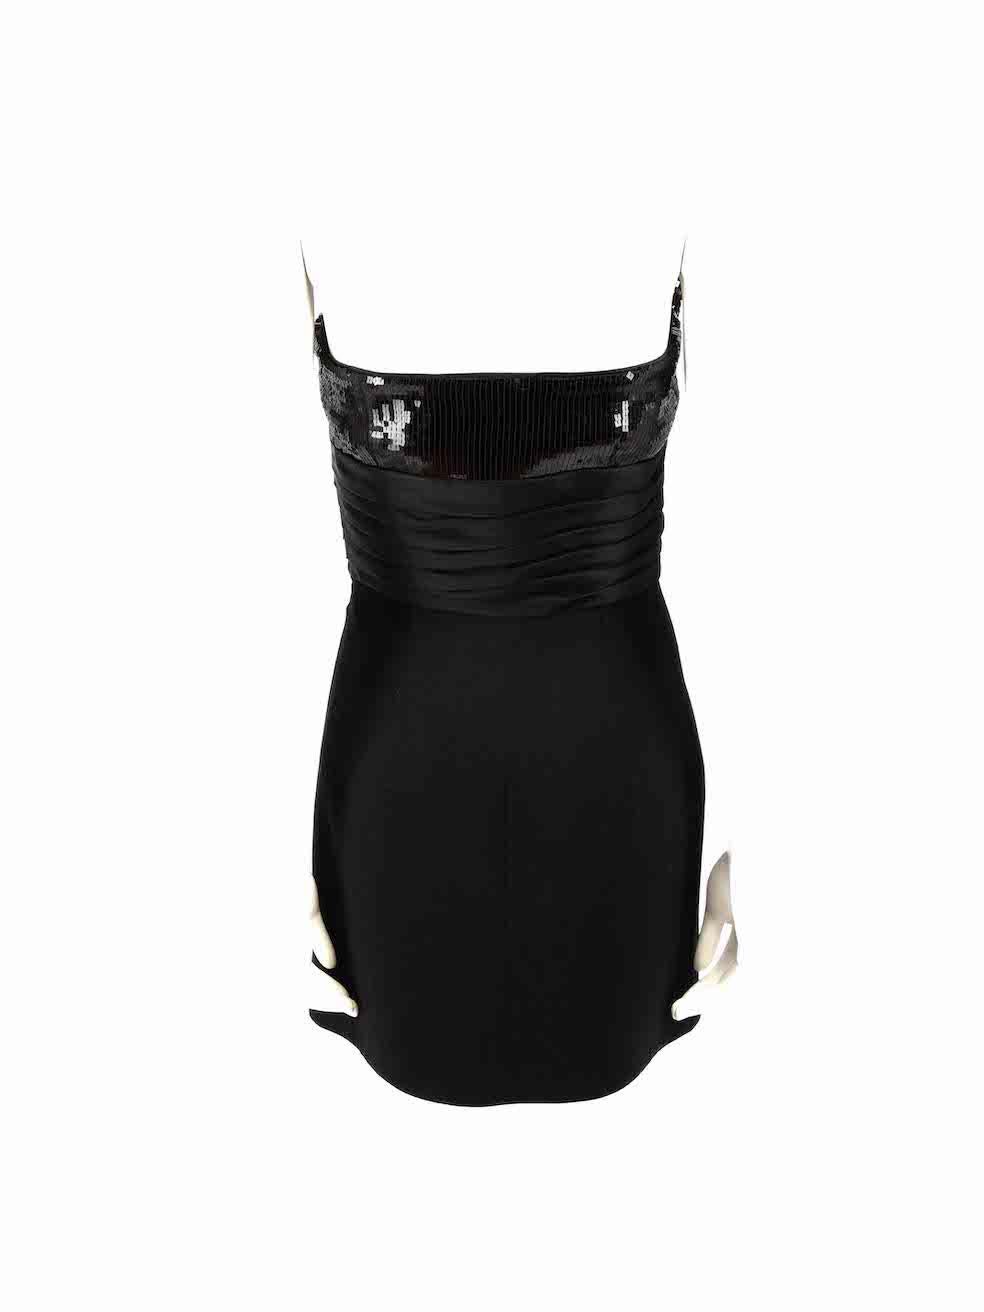 Saint Laurent Black Strapless Sequin Bustier Mini Dress Size M In New Condition For Sale In London, GB